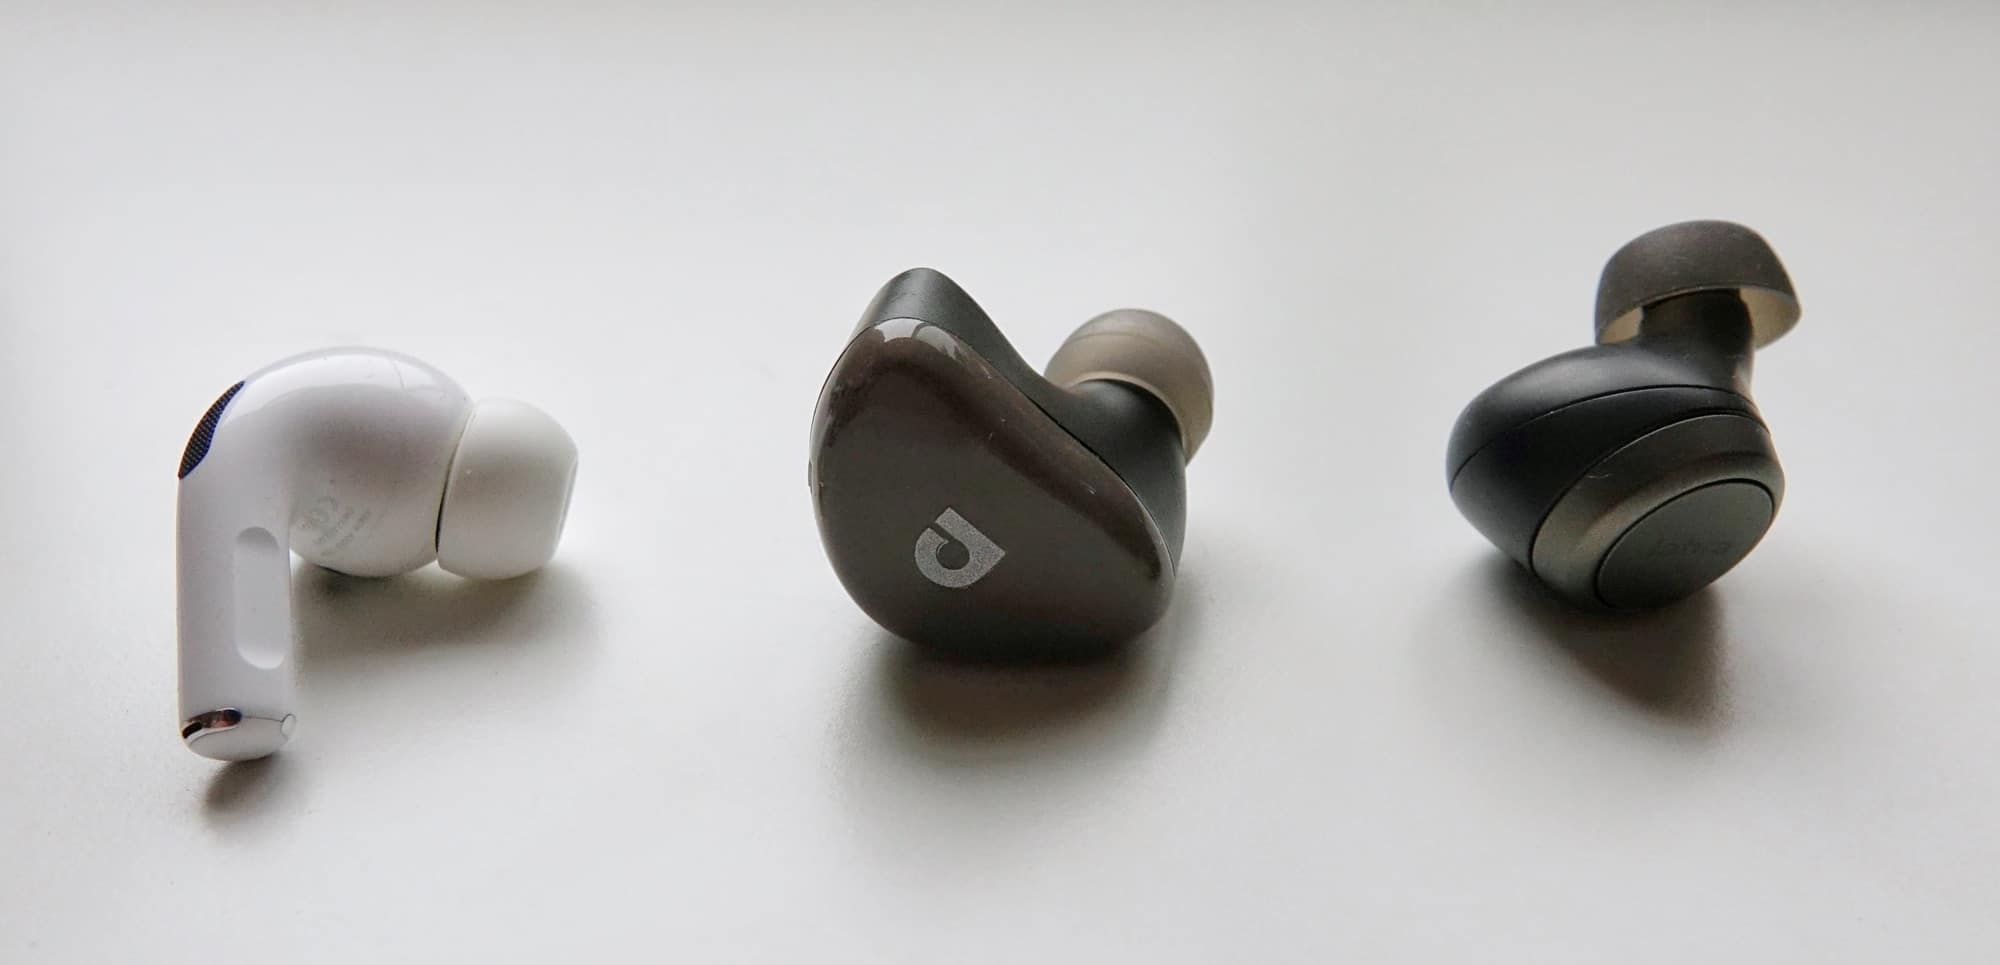 Comparing the size between the AirPods Pro (left), Audiofly AFT2 (middle), and Jabra Elite 75t (right).